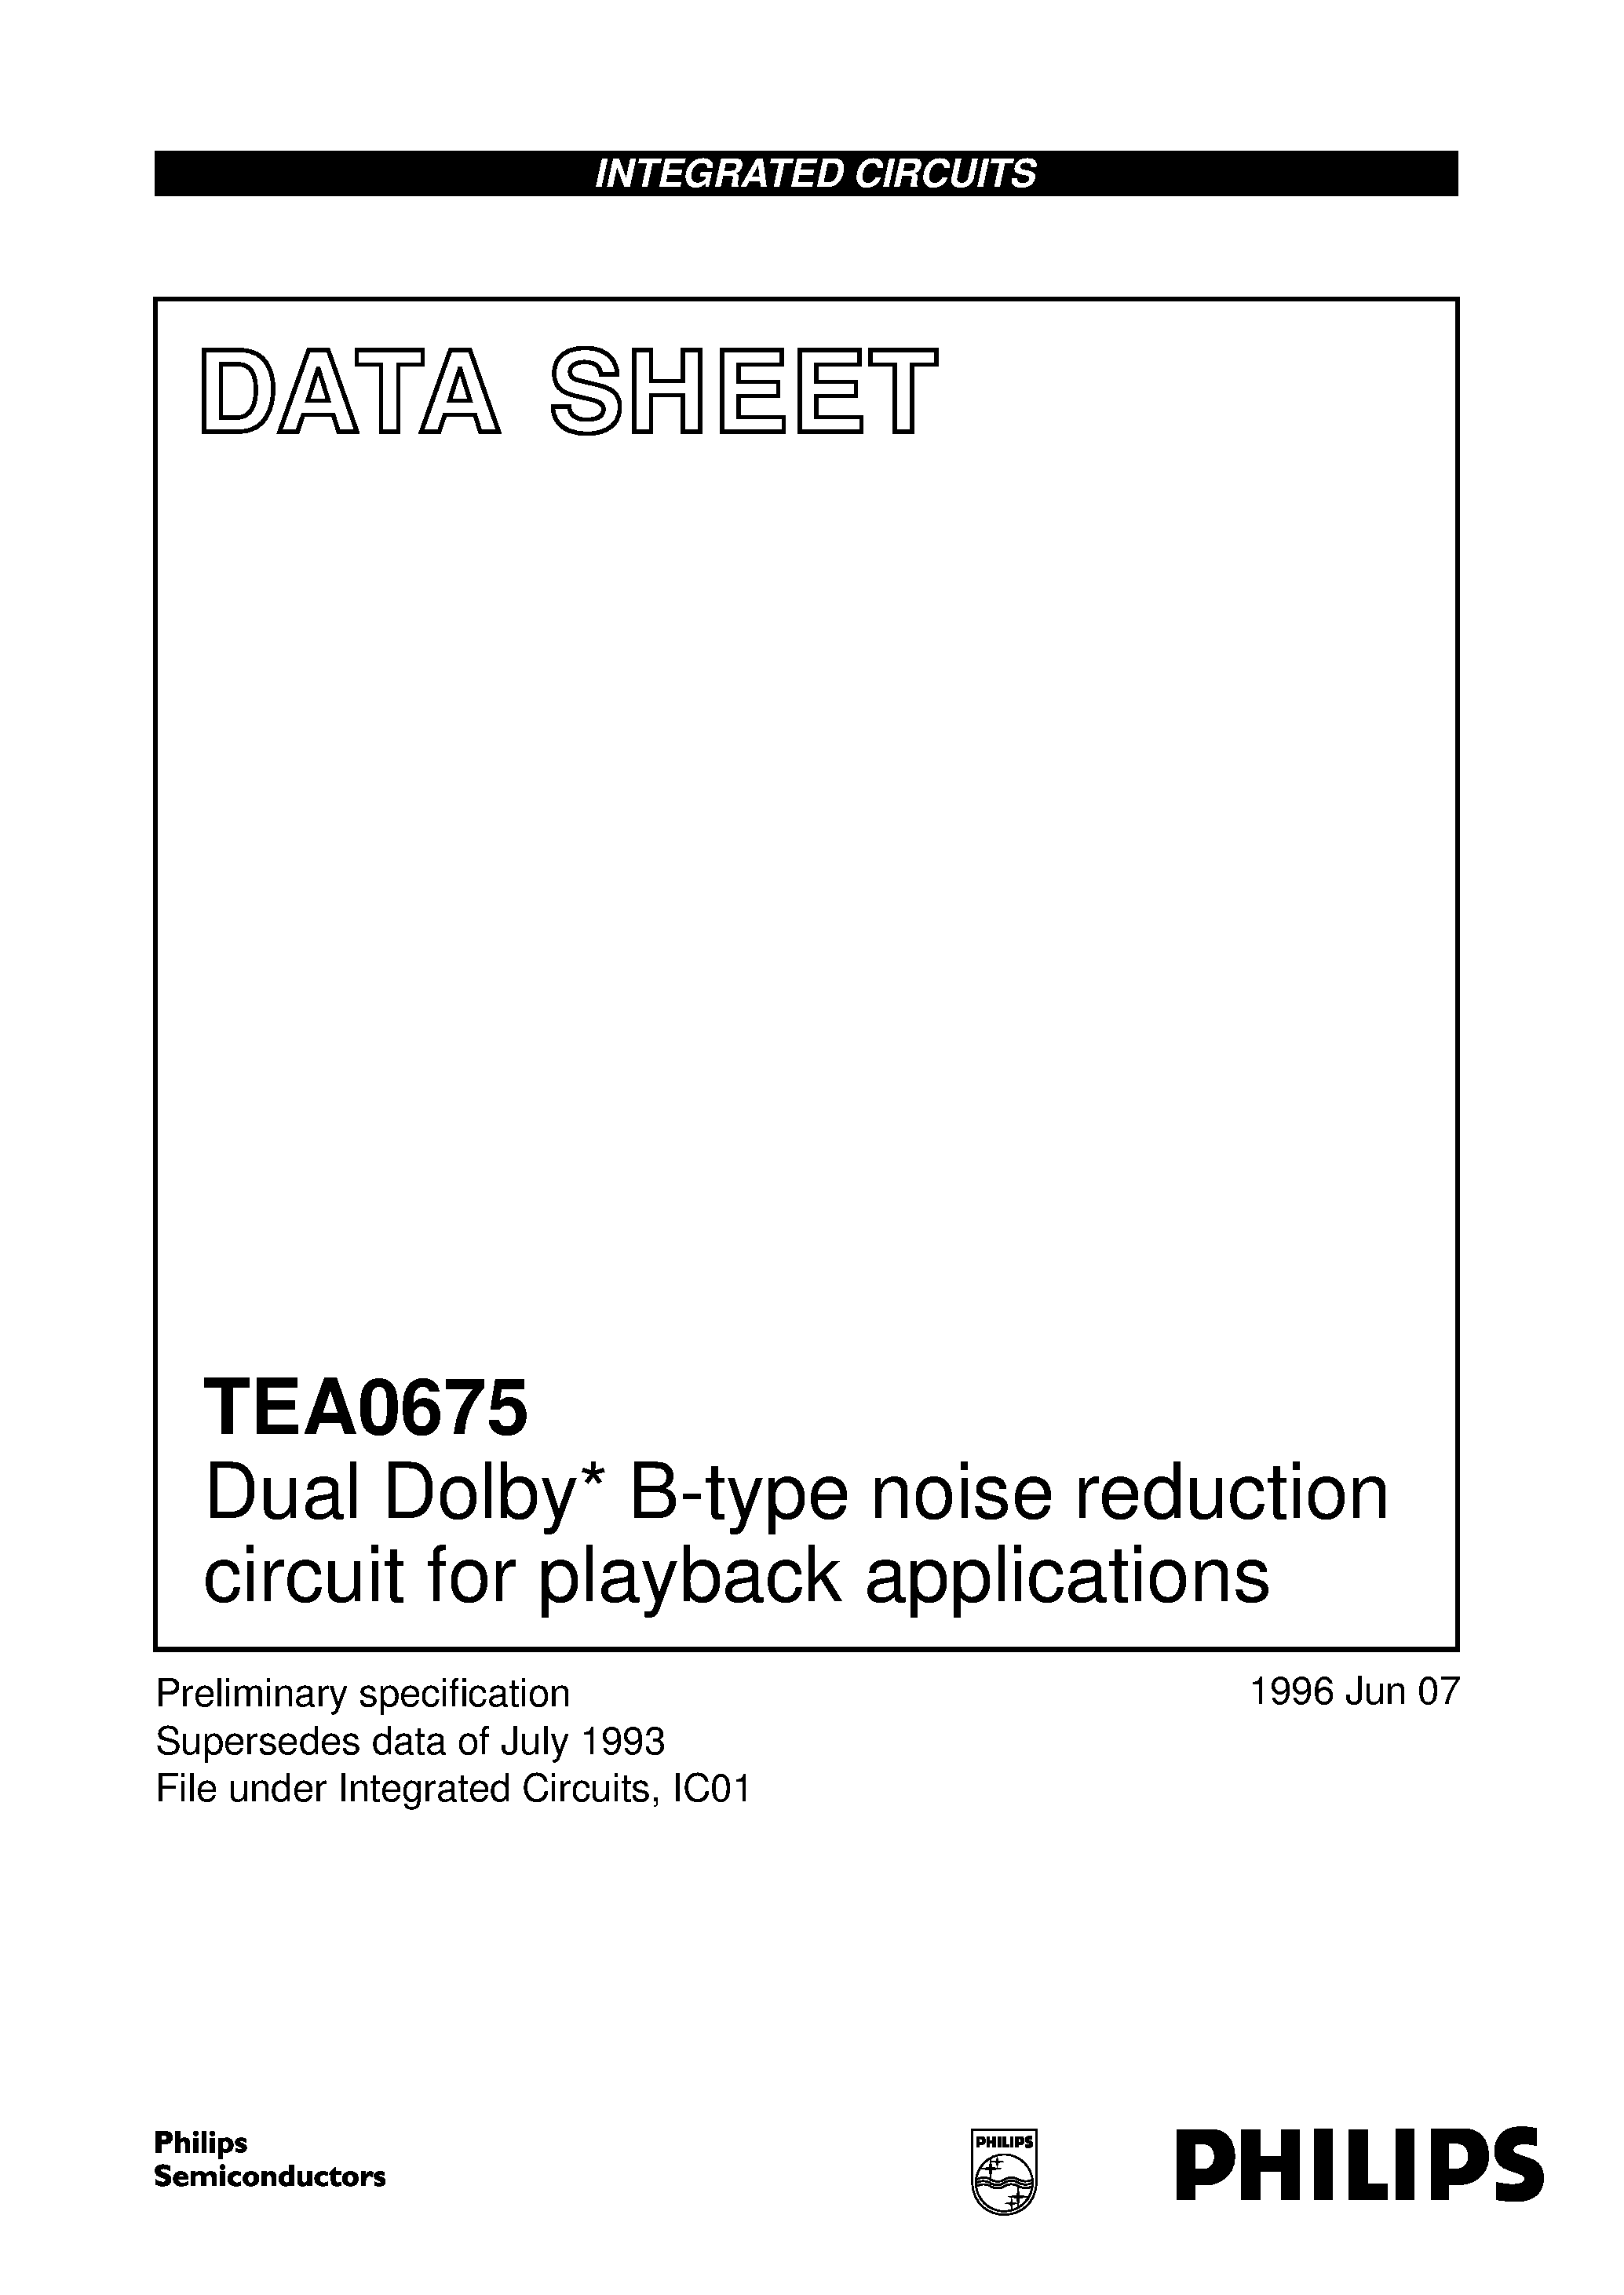 Datasheet TEA0675 - Dual Dolby* B-type noise reduction circuit for playback applications page 1